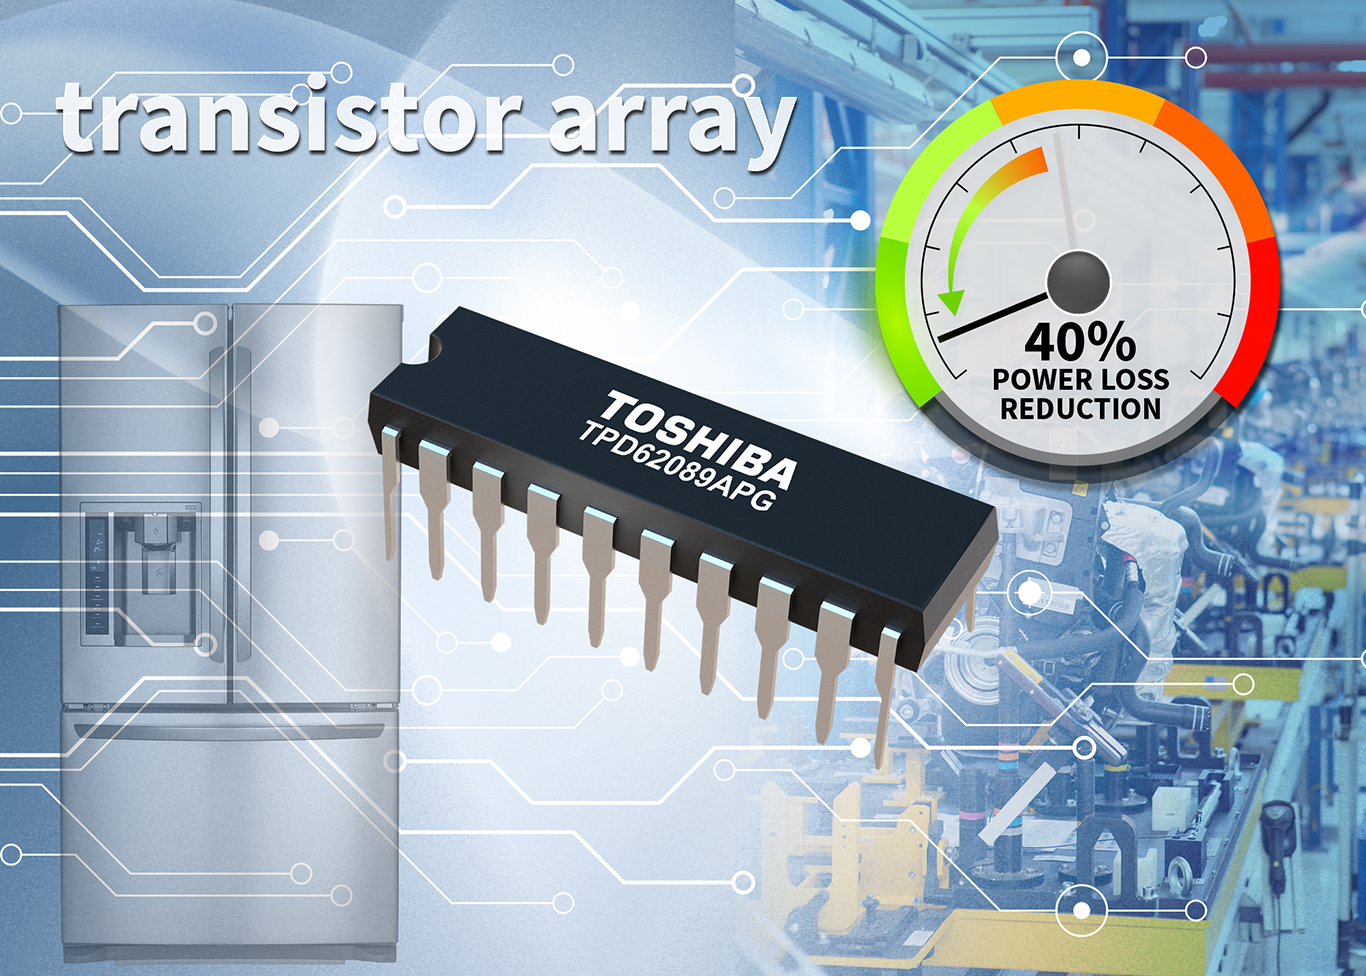 Toshiba launches transistor array for HV transmitters